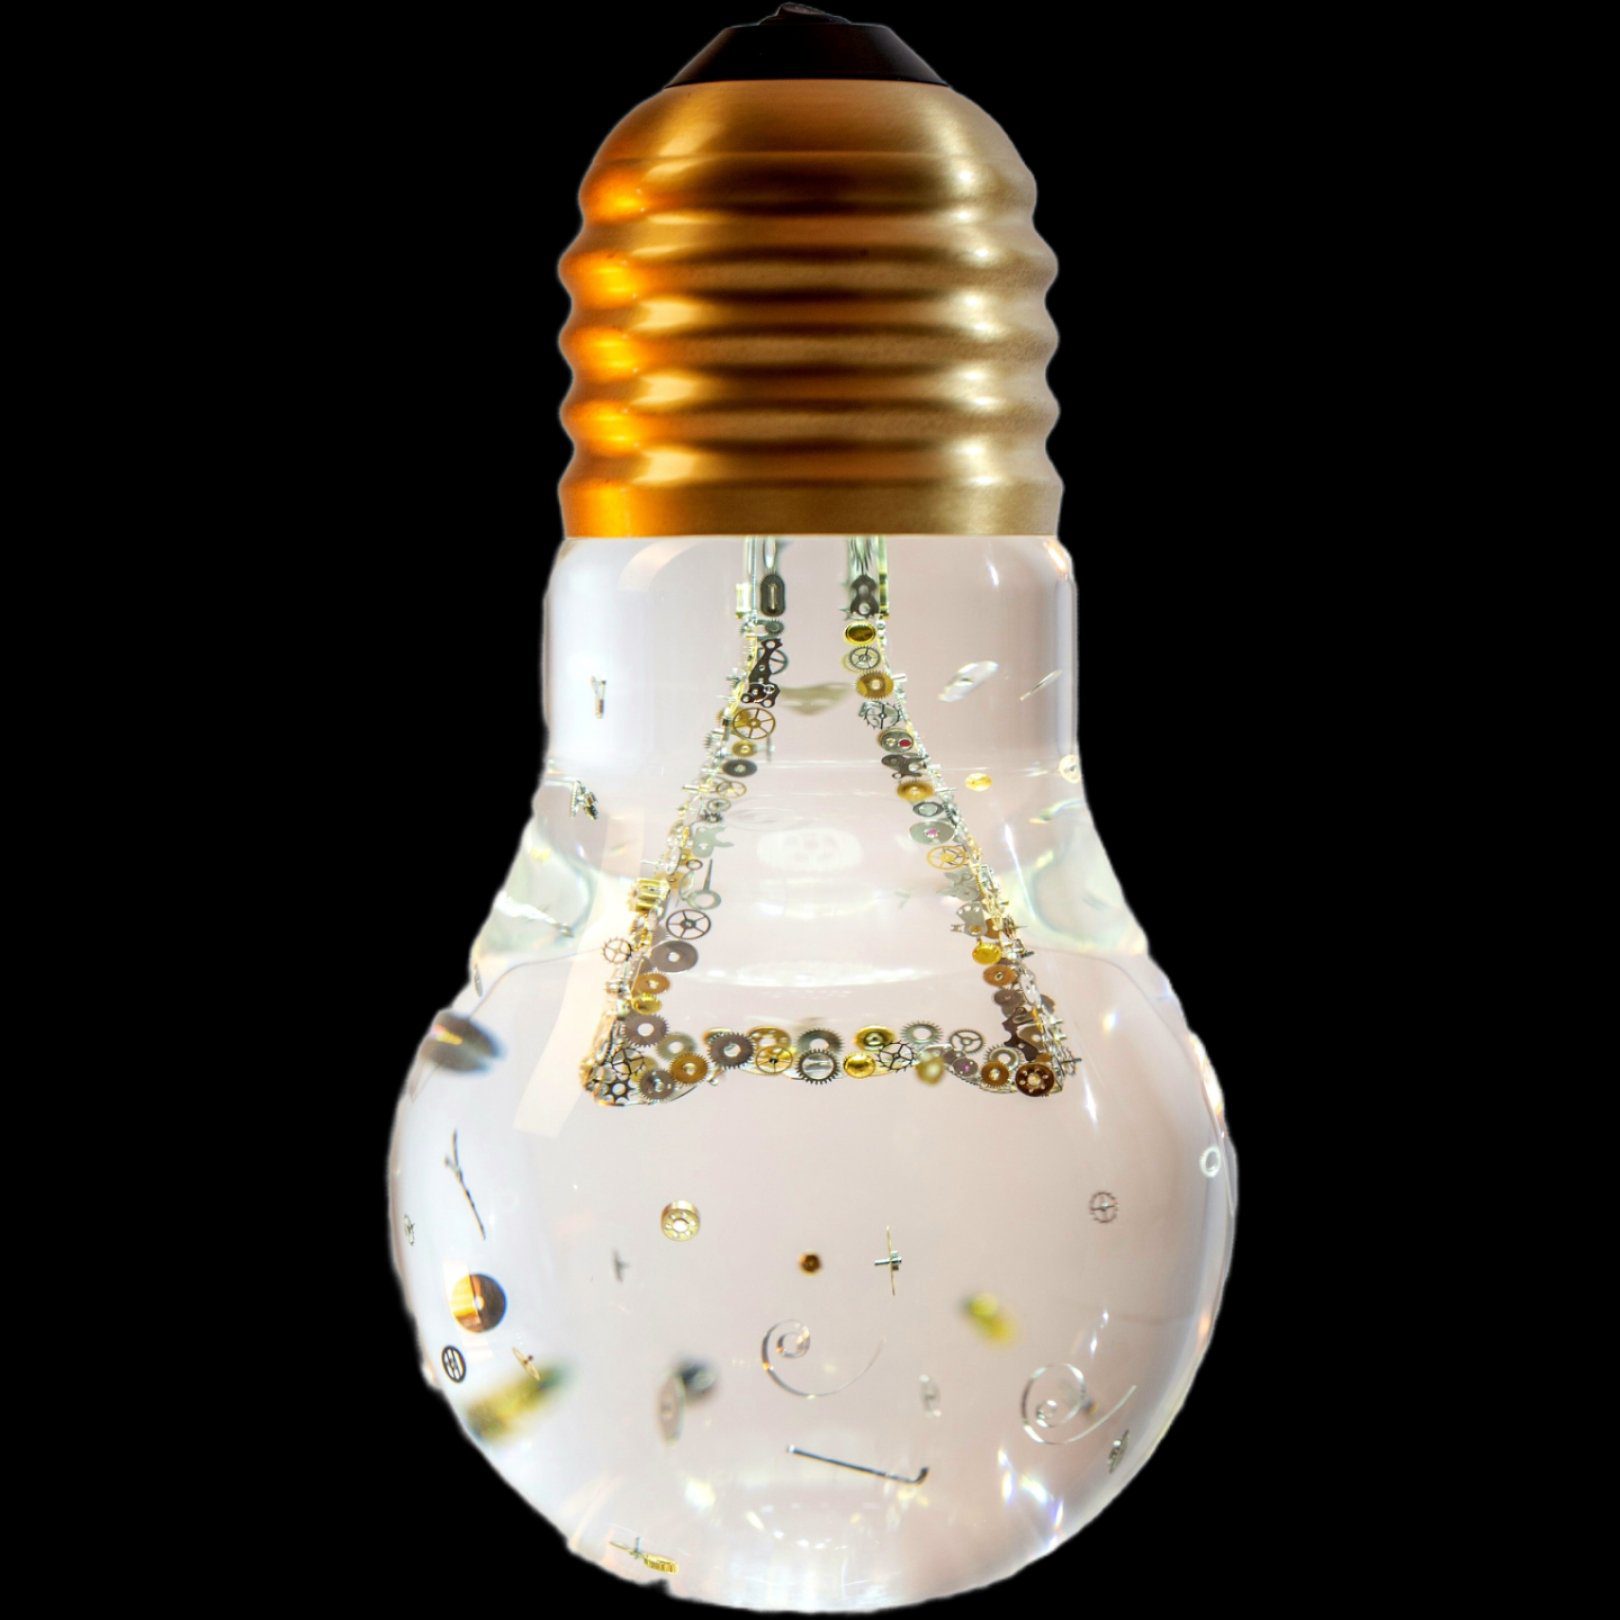 Limited edition brass bulb sculpture by Eddie Kurayev and Albert Akbashev auction at Sotheby's via 360 MAGAZINE.